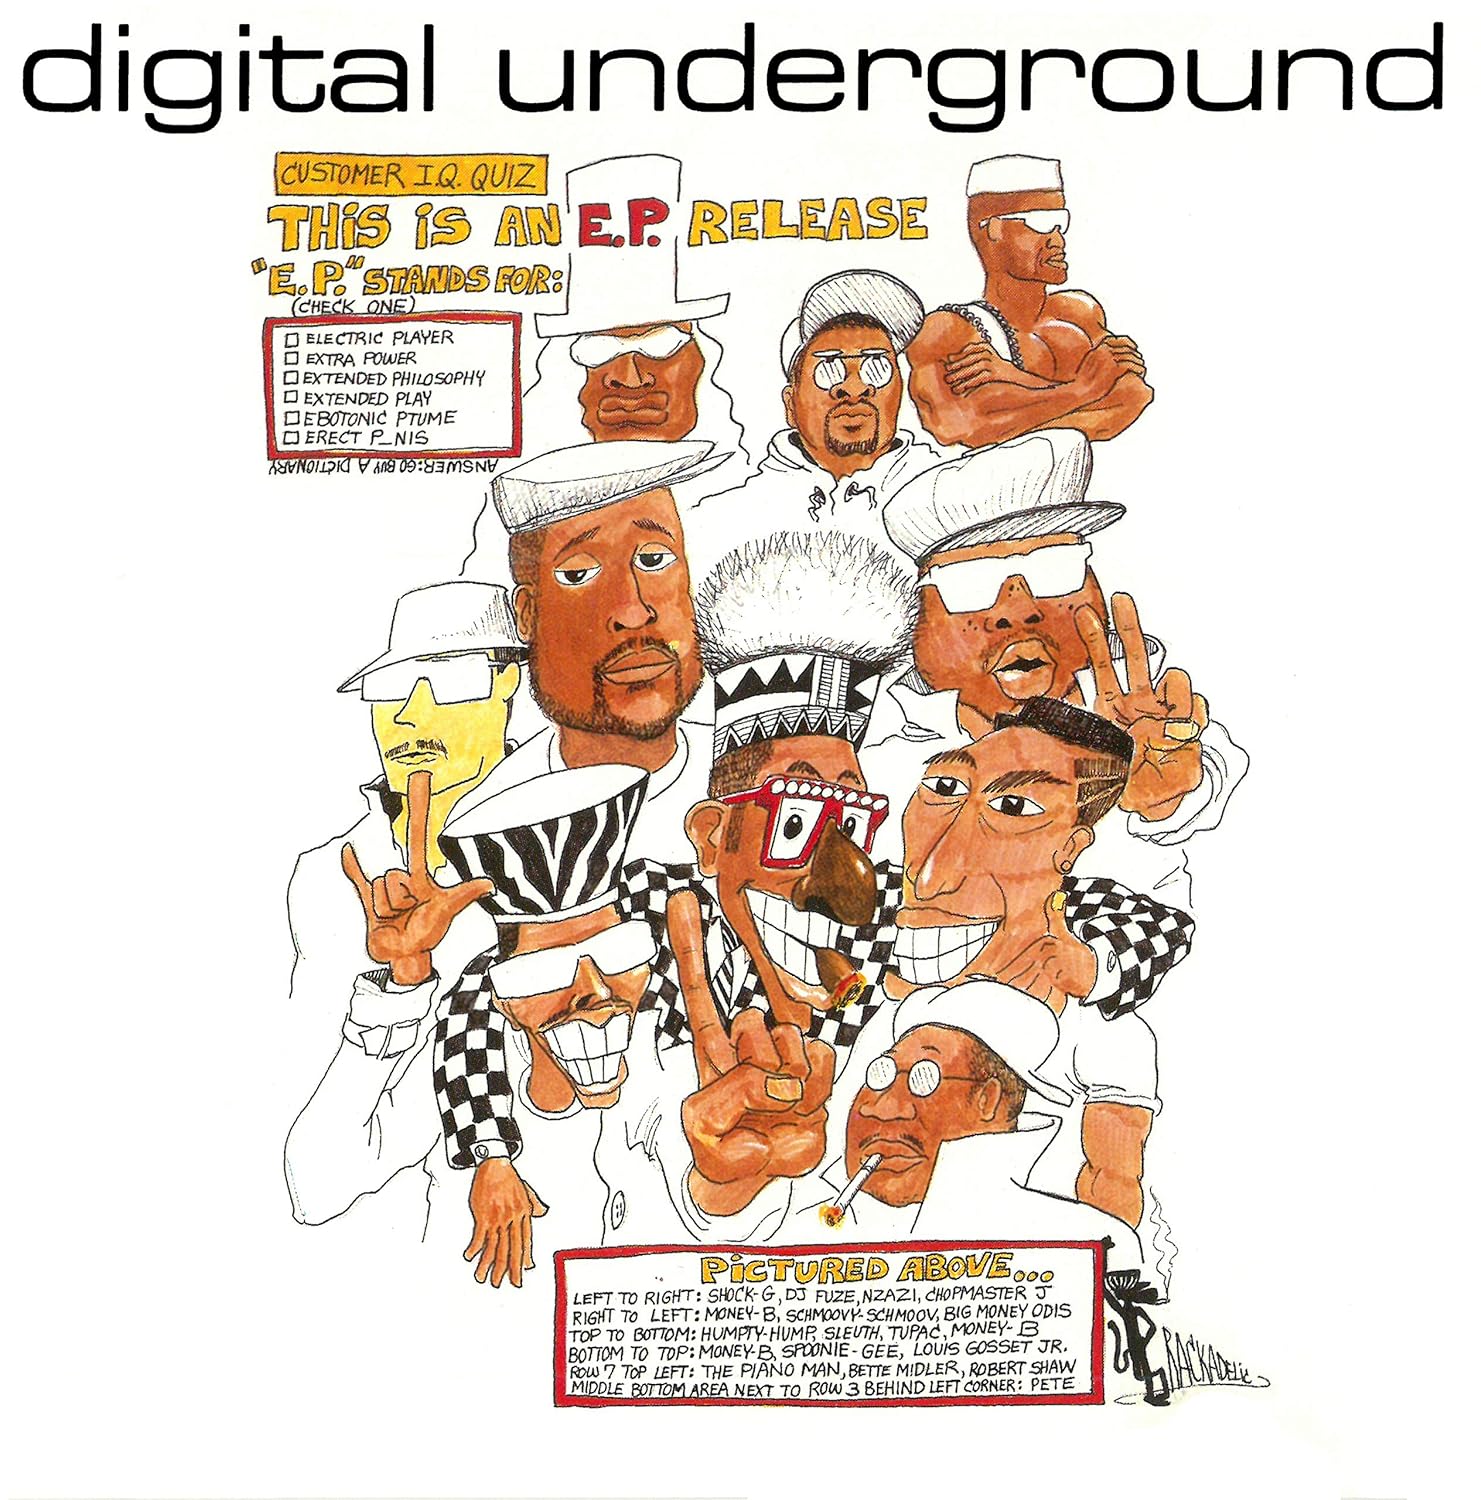 DIGITAL UNDERGROUND – This Is An E.P. Release